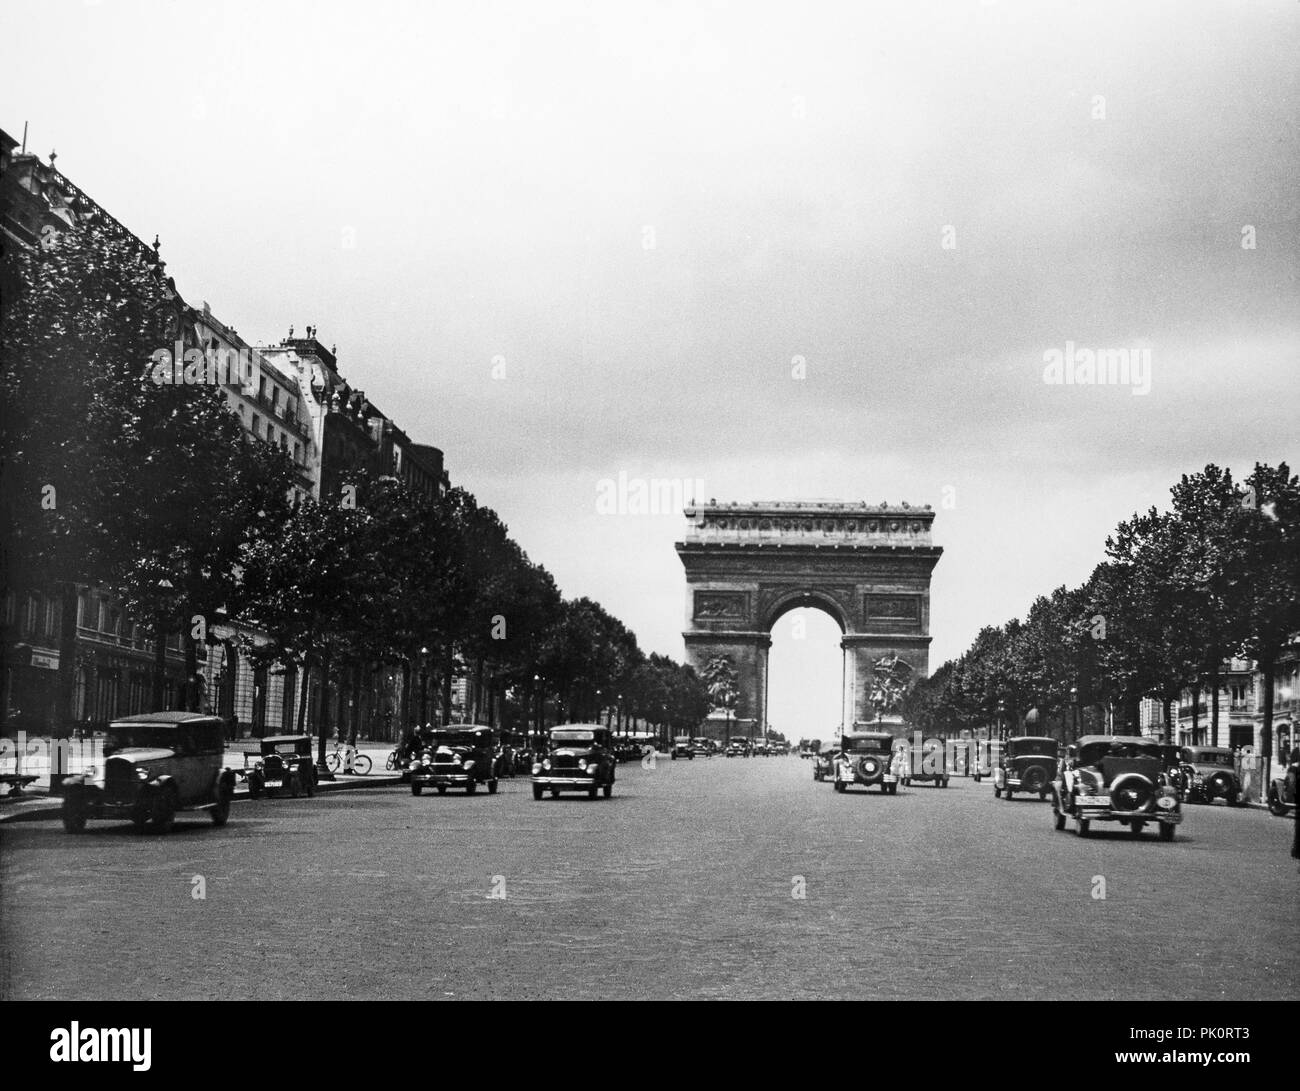 View of the Arc de Triumph in Paris, 1931, showing vehicles and fashion of the time. Stock Photo